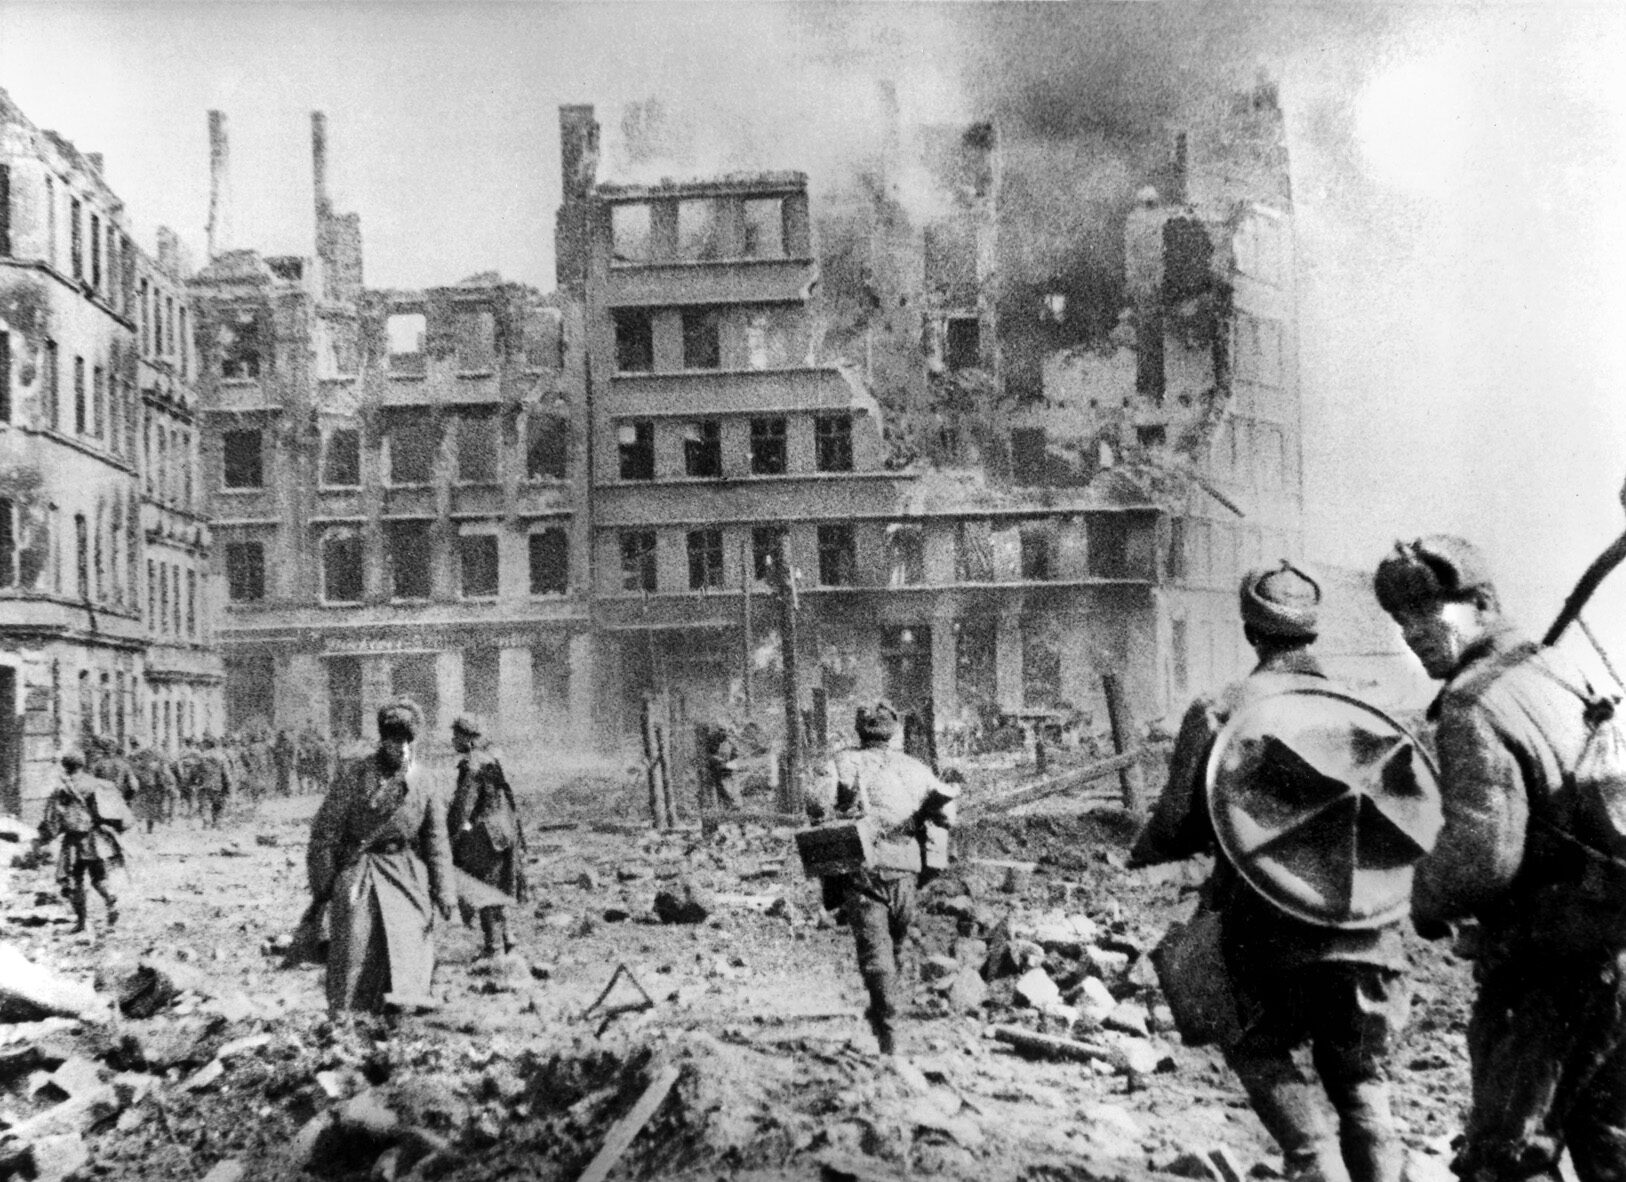 During operations to mop up the last vestiges of German resistance in Königsberg, Soviet troops move forward warily amid the rubble of the city on April 9, 1945. After a two-month siege, an aggressive Soviet effort took Königsberg in four days of intense fighting.